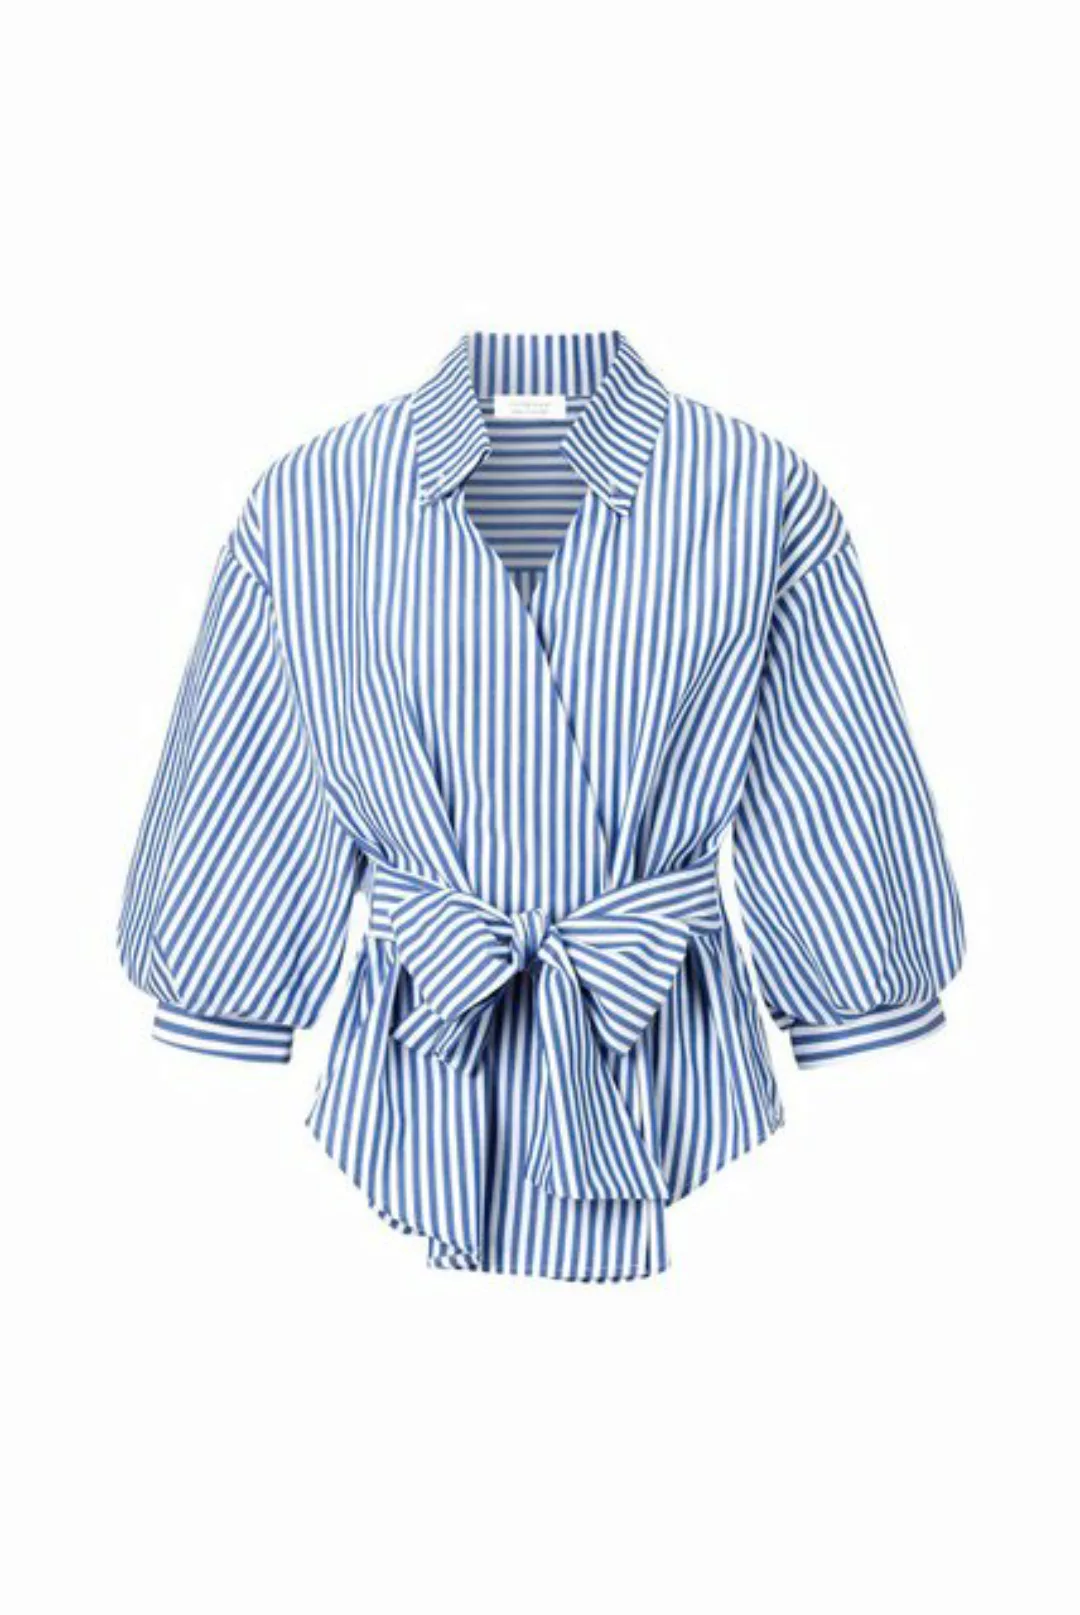 Rich & Royal Blusentop Striped blouse with puffed sleeves günstig online kaufen